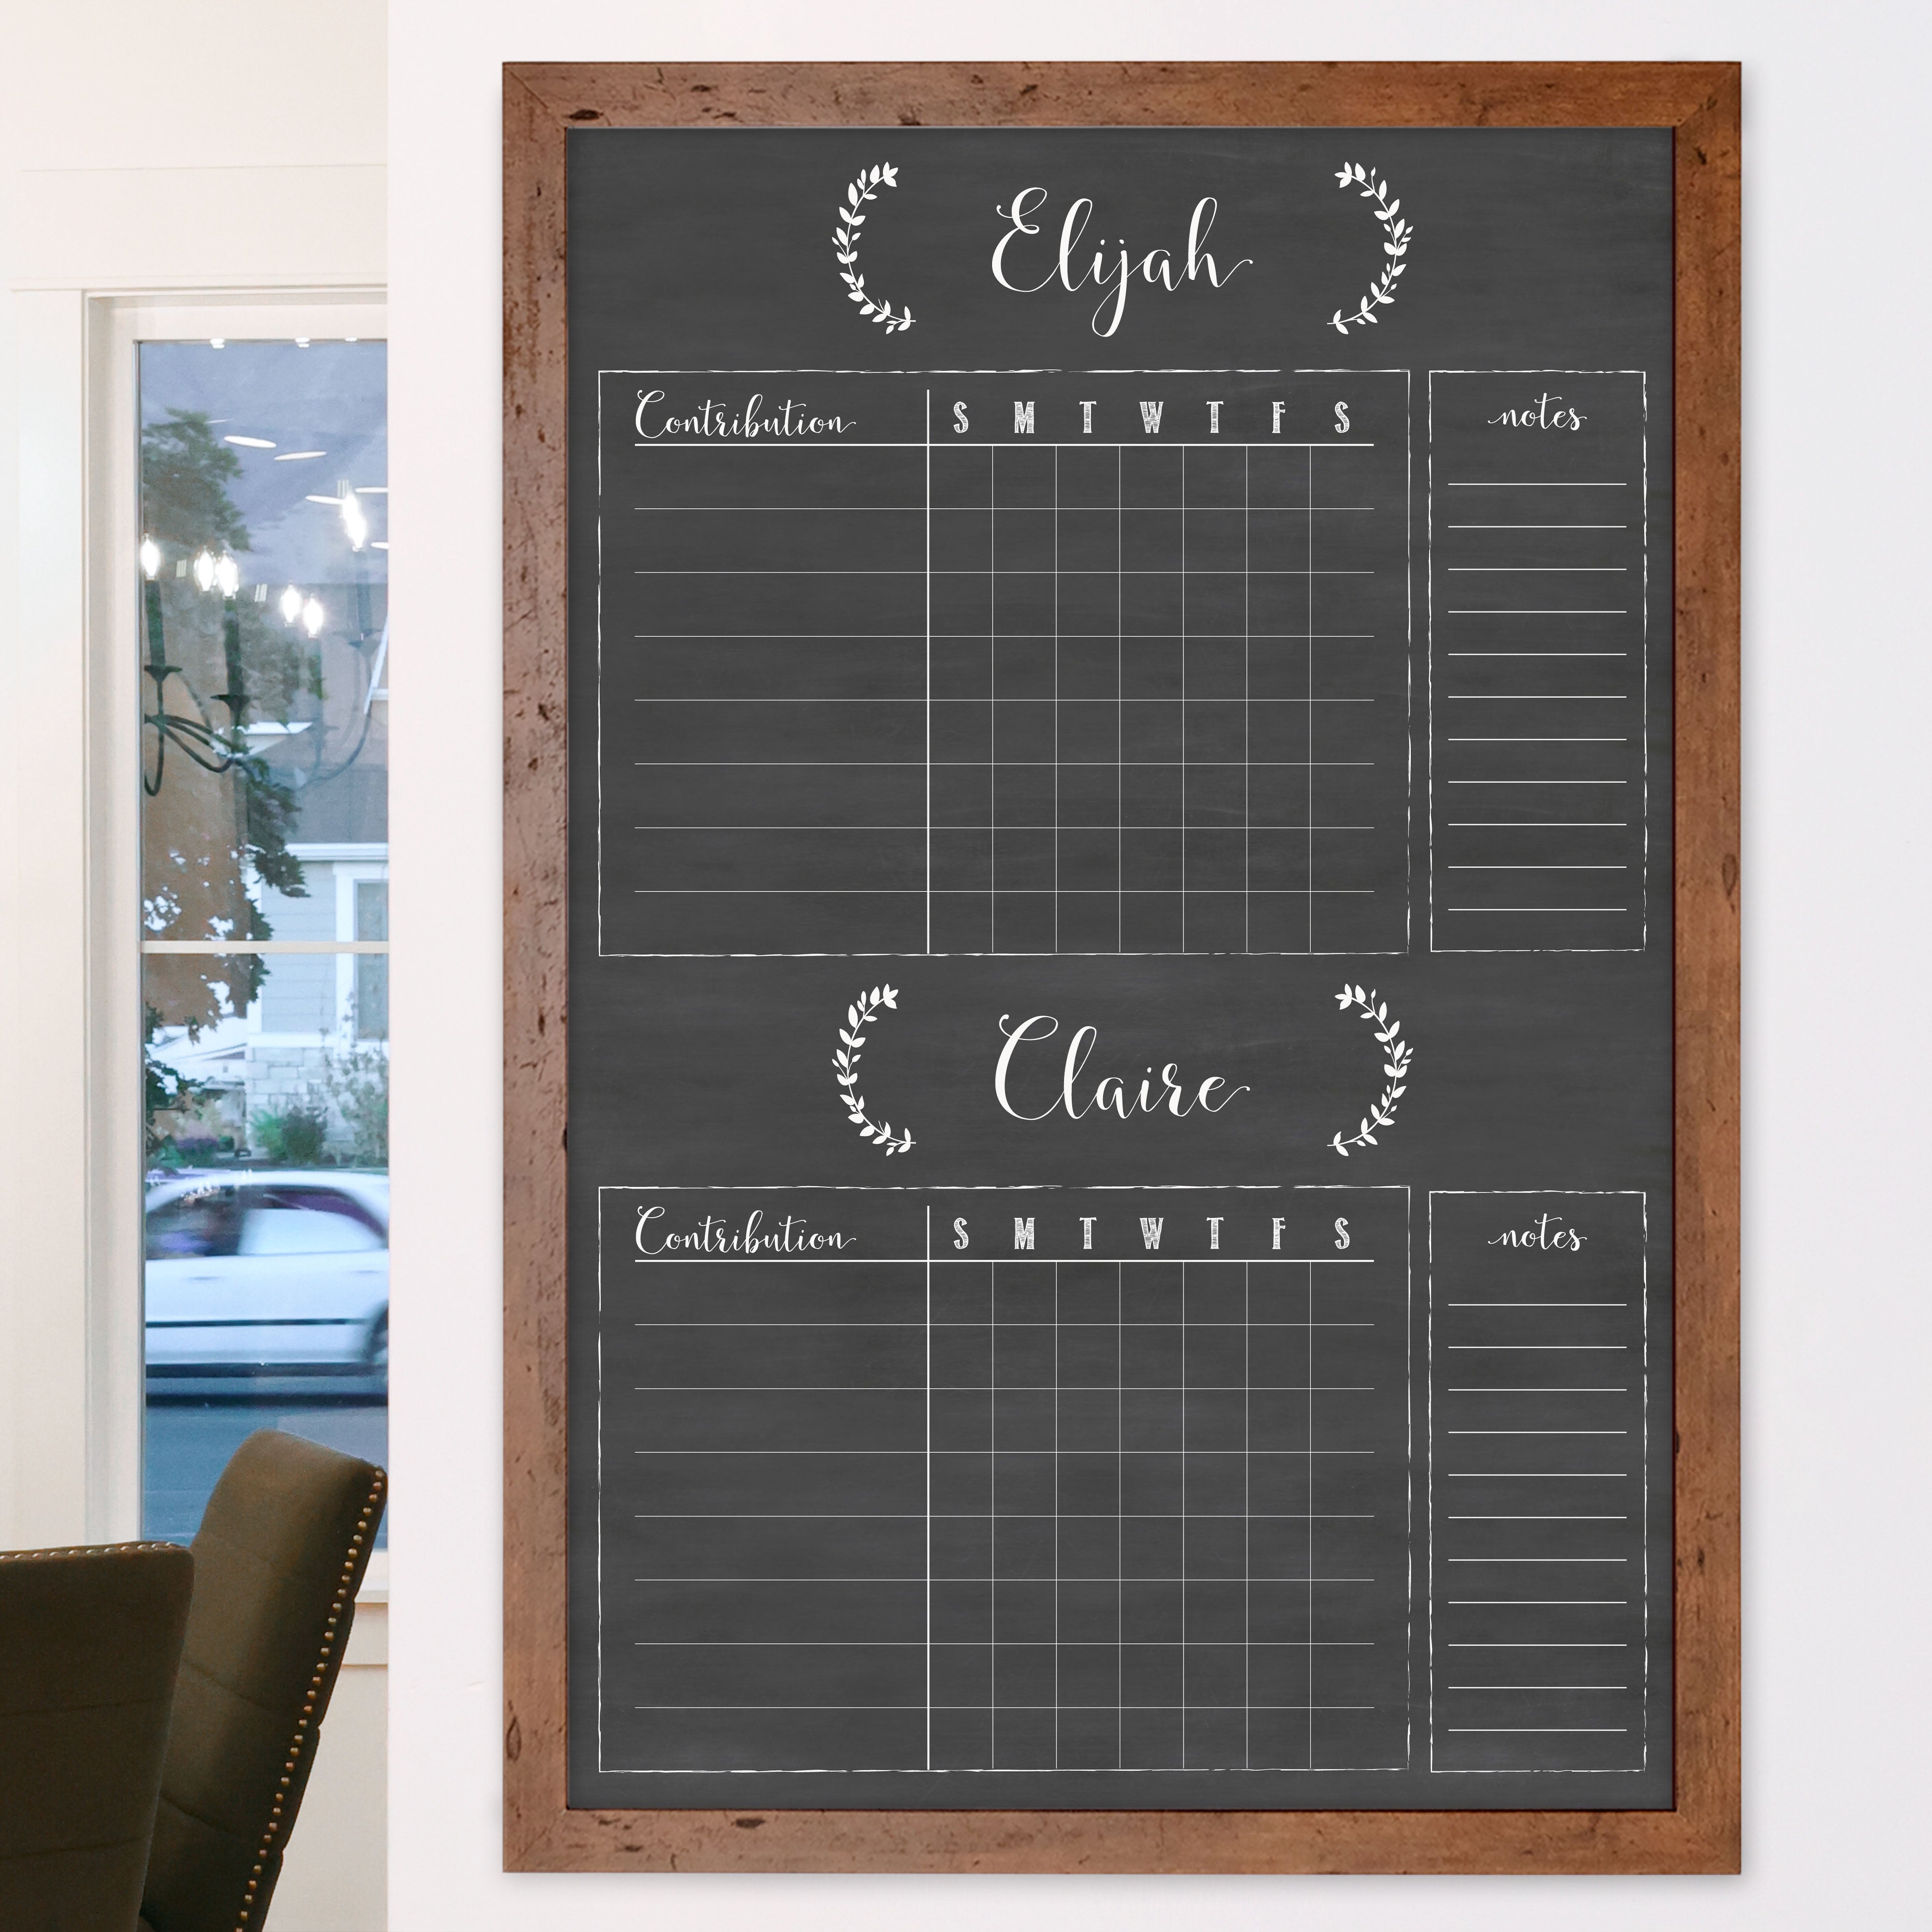 A framed dry-erase chore chart with a chalkboard look hanging on the wall